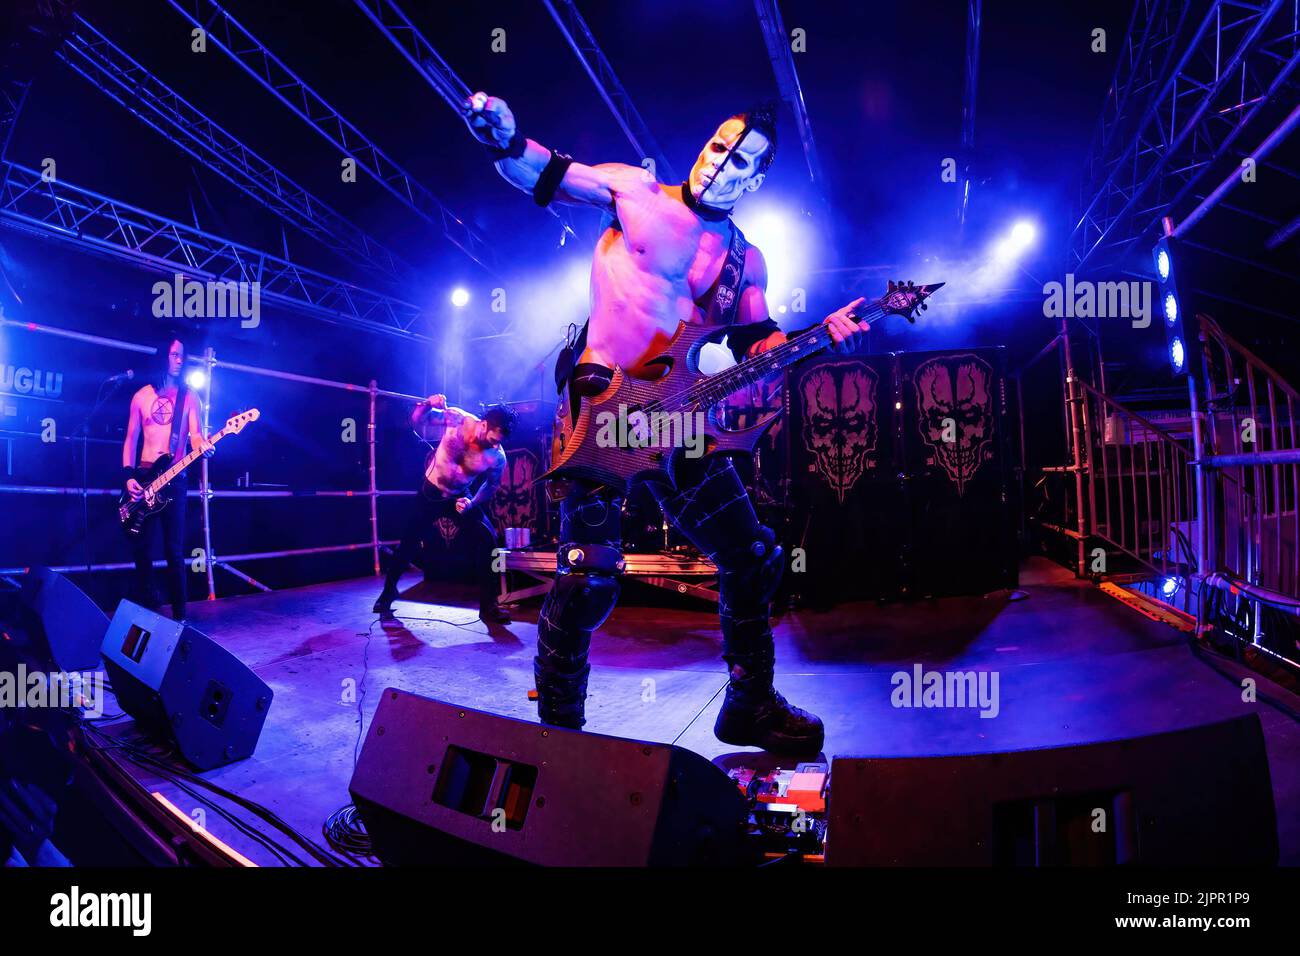 Milano, Italy. 19th Aug, 2022. Doyle Wolfgang von Frankenstein from Misfits performs live during a concert at Circolo Magnolia. Doyle Wolfgang von Frankenstein, is an American guitarist best known for his material with the horror punk band the Misfits and his own band eponymously named Doyle. Credit: SOPA Images Limited/Alamy Live News Stock Photo